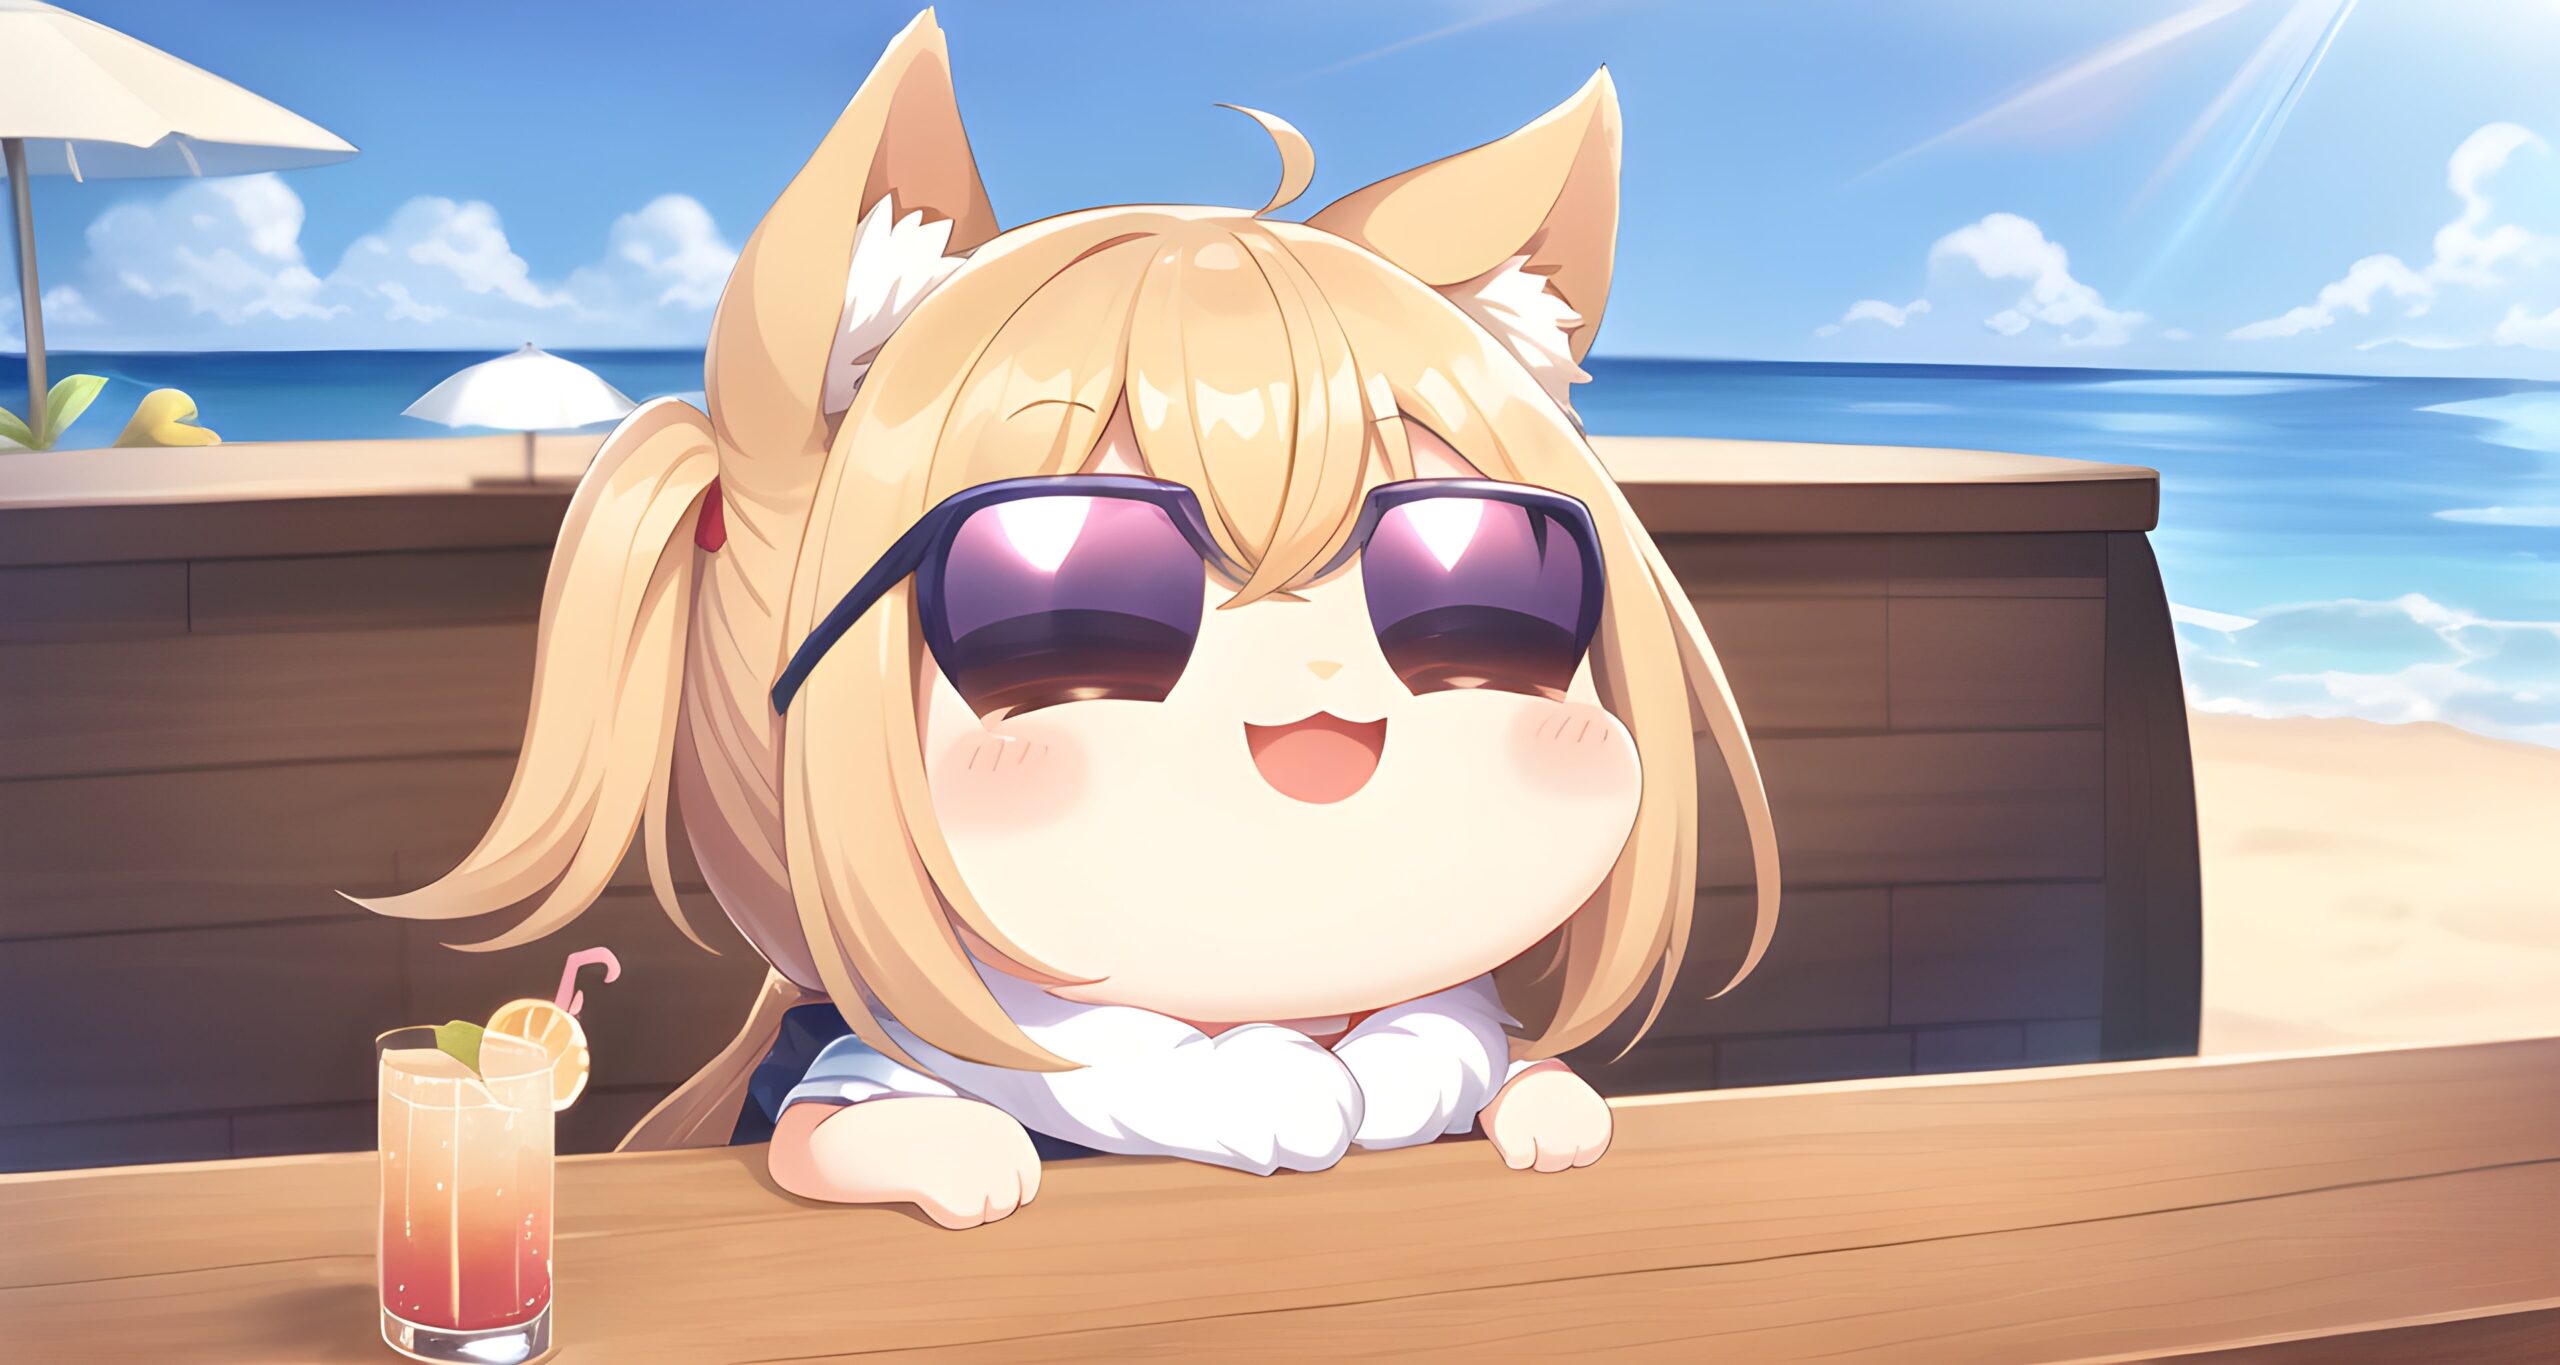 Wolfgirl relaxing at the Beach